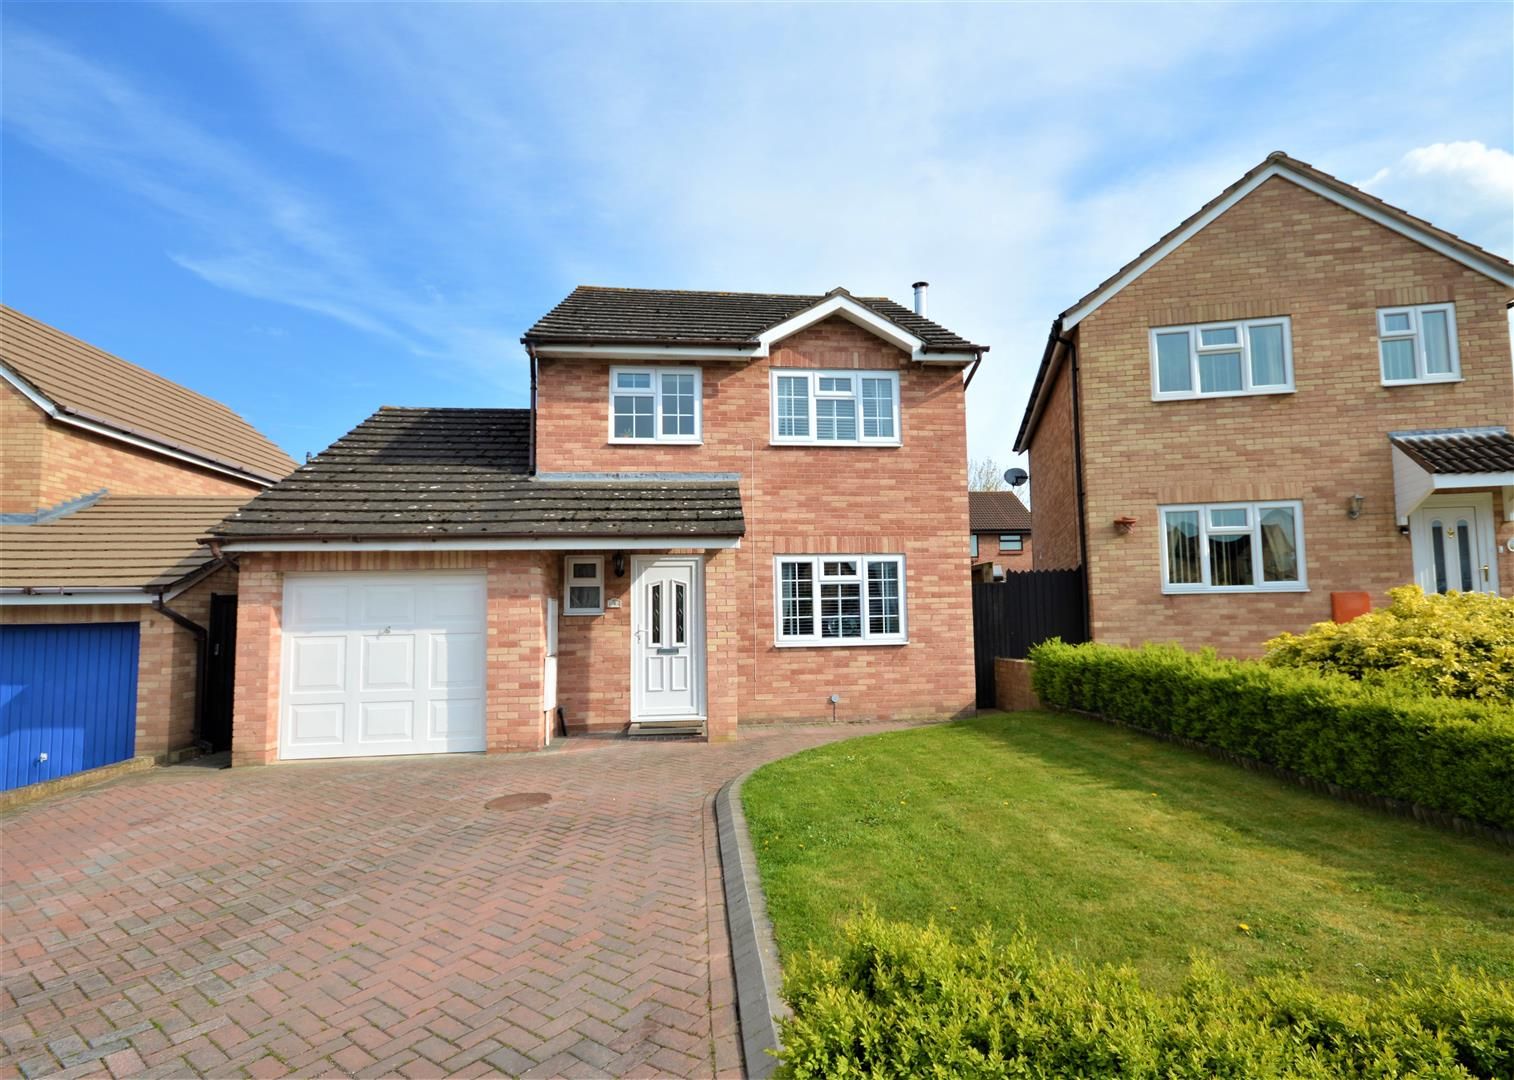 3 bed detached for sale in Belmont  - Property Image 1